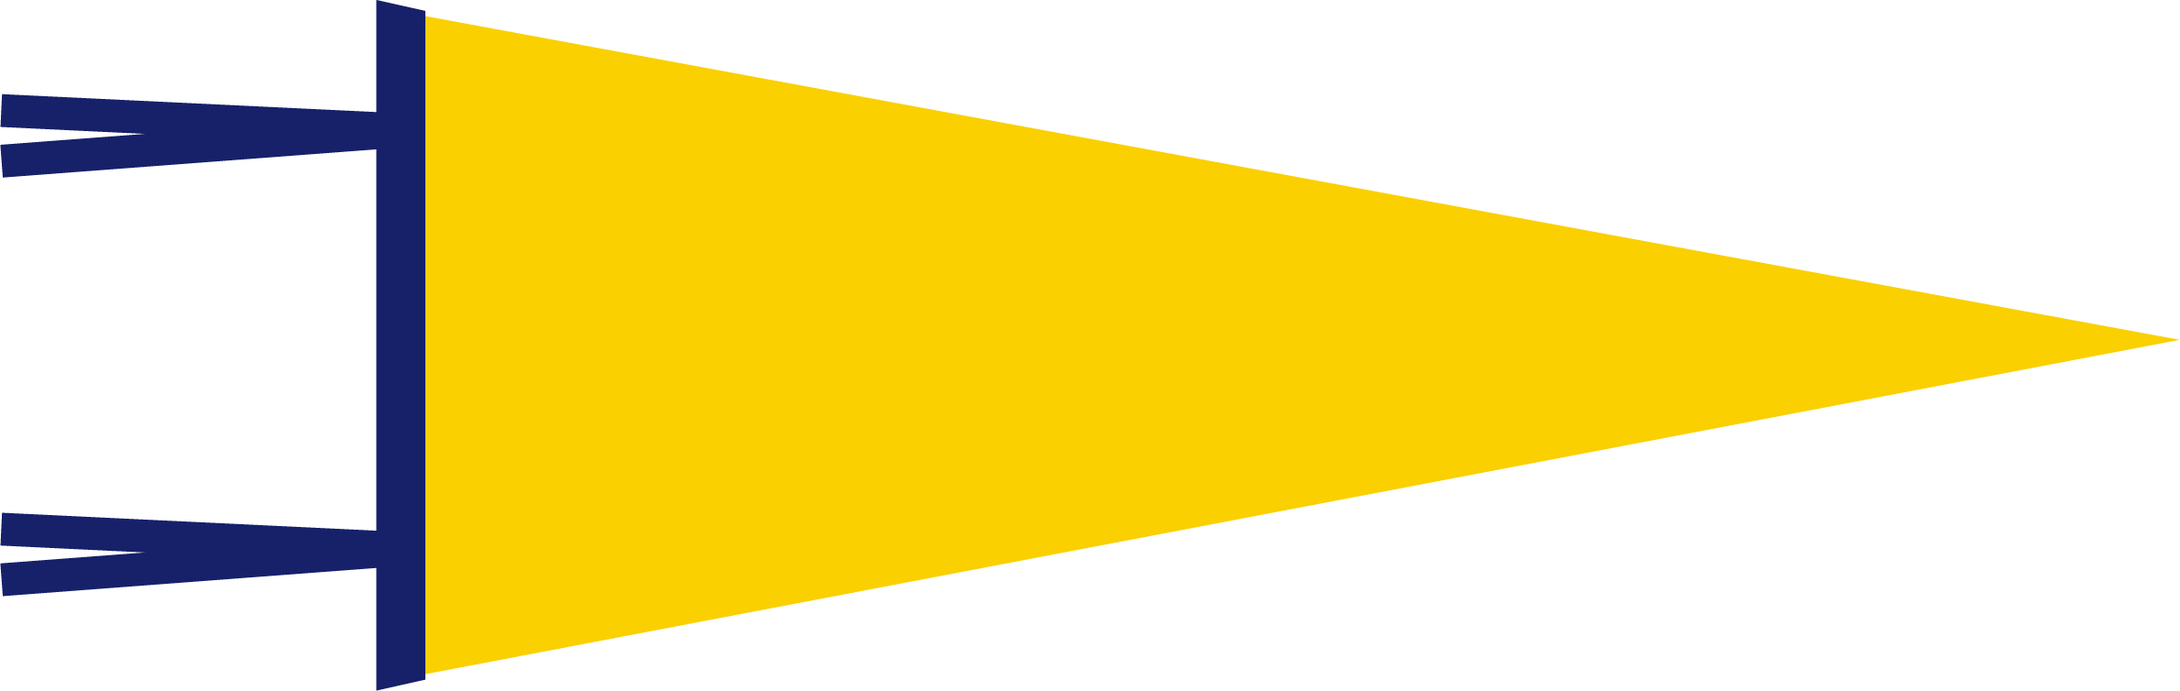 Yellow and Navy Blank Pennant Flag